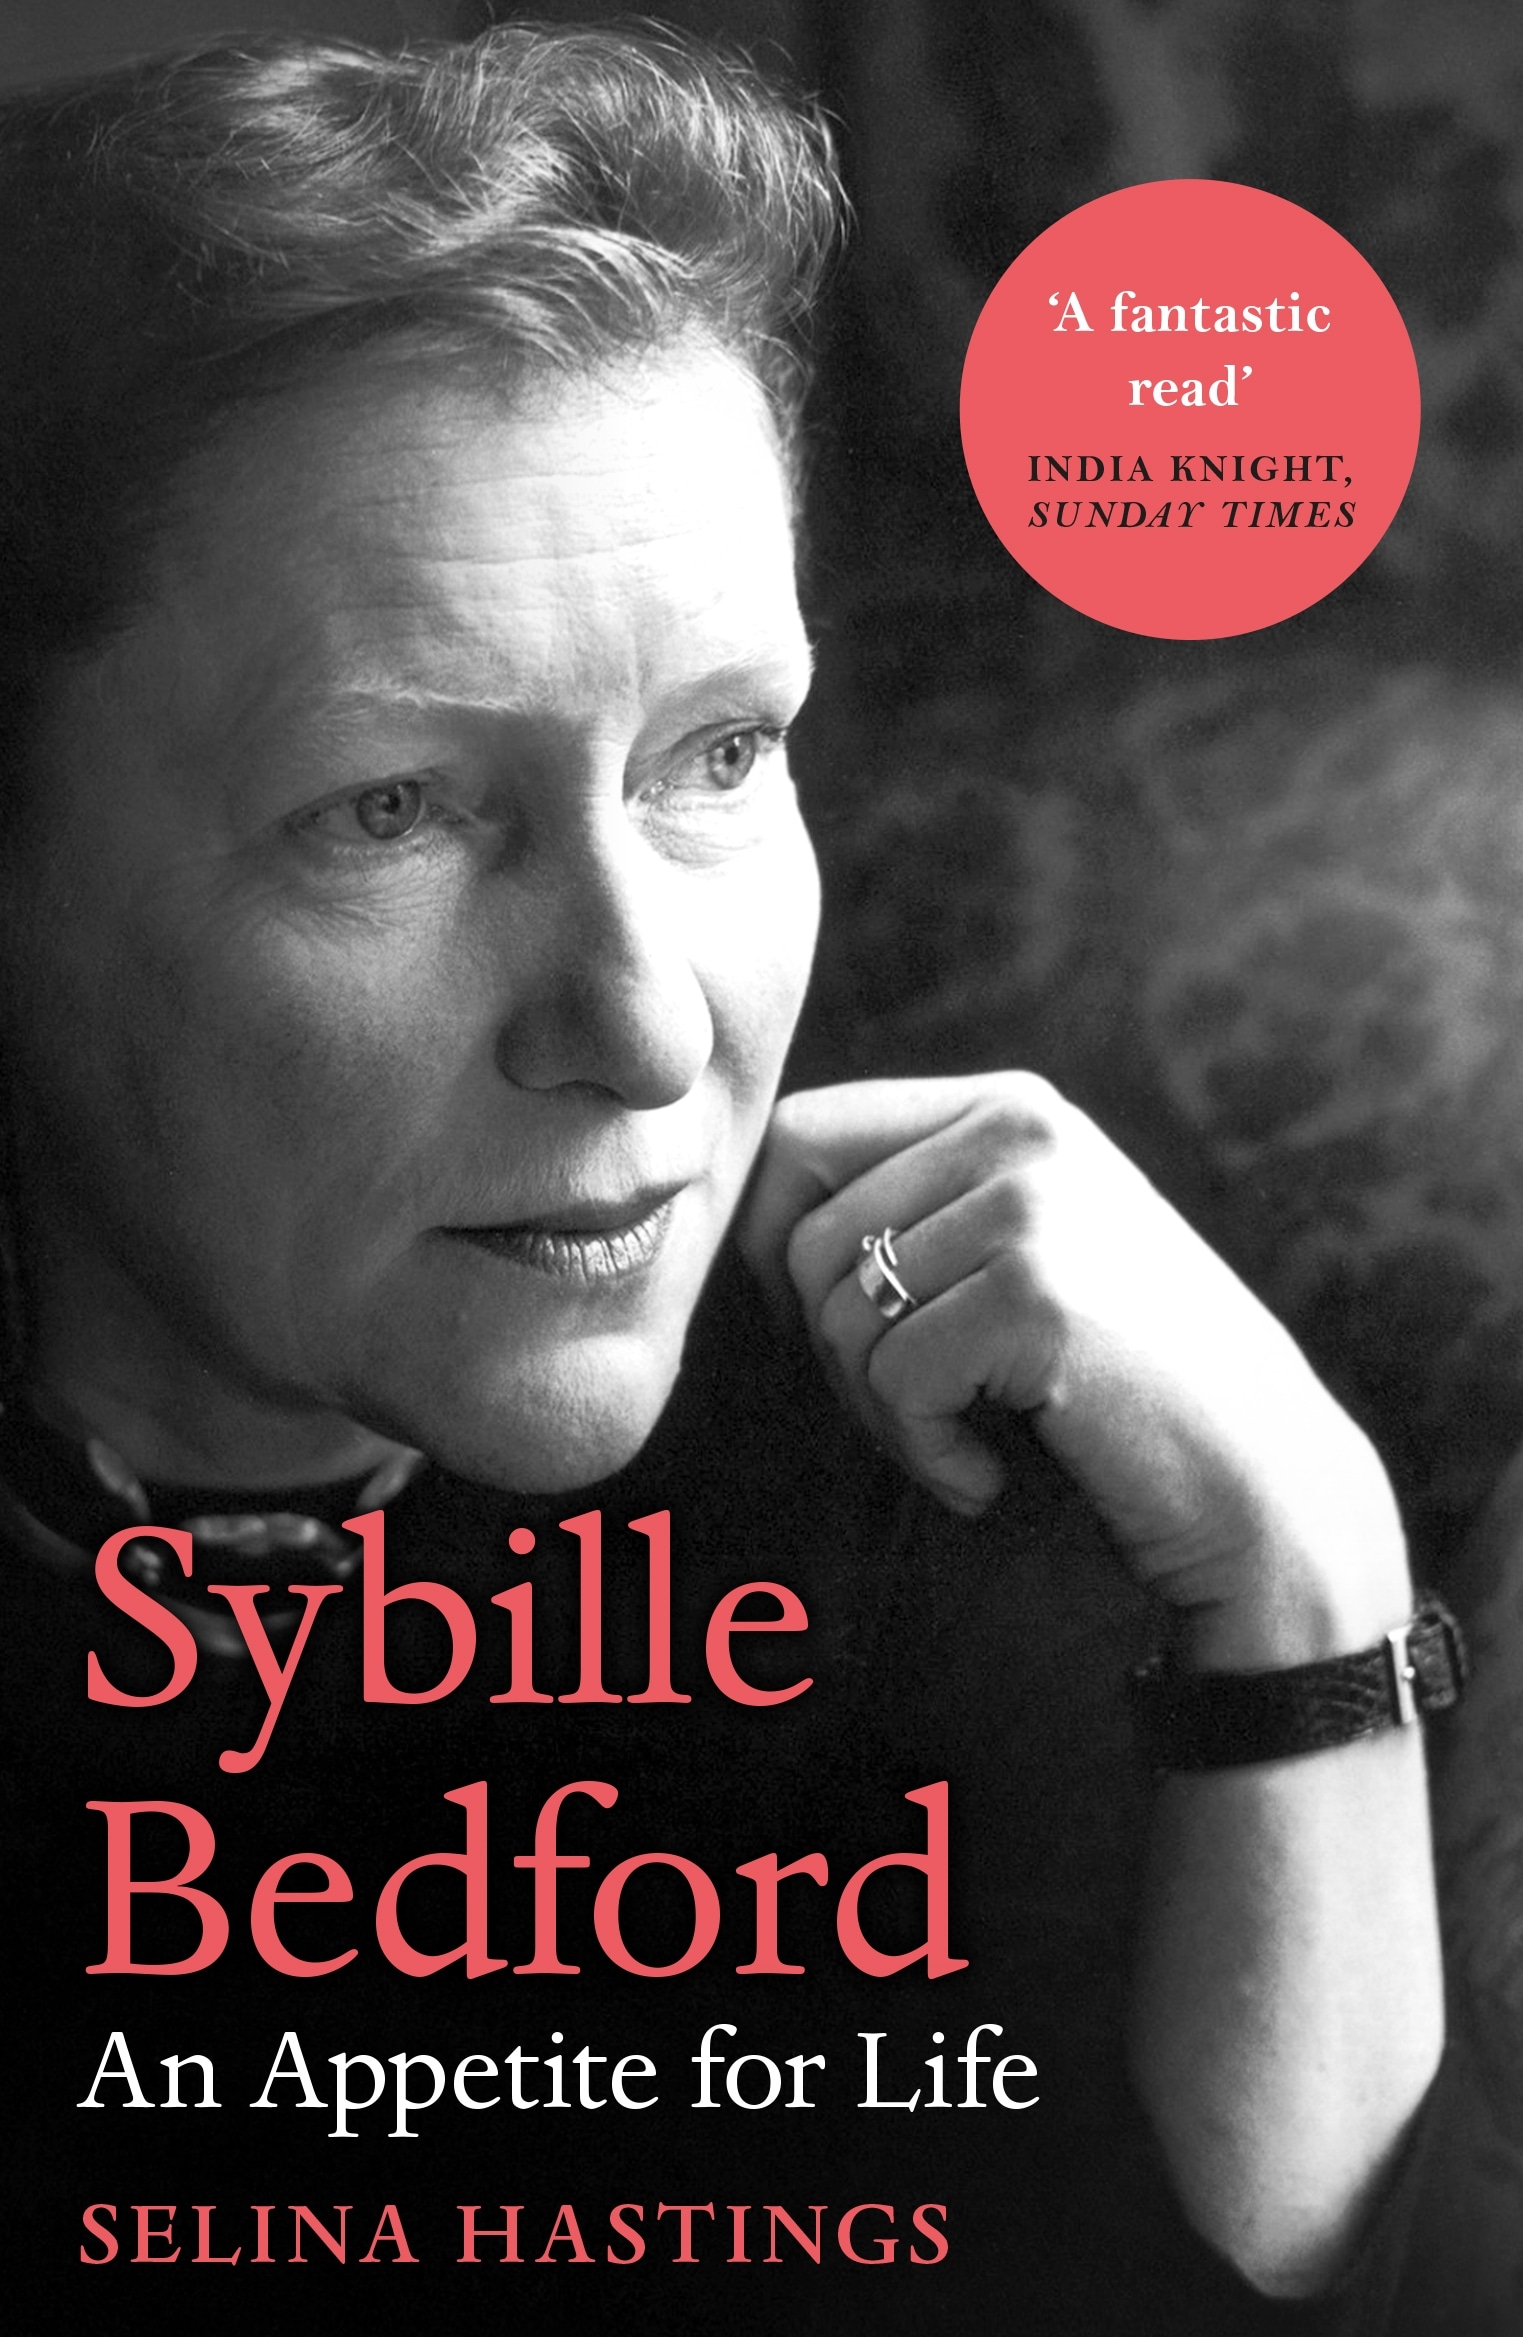 Book “Sybille Bedford” by Selina Hastings — November 10, 2022